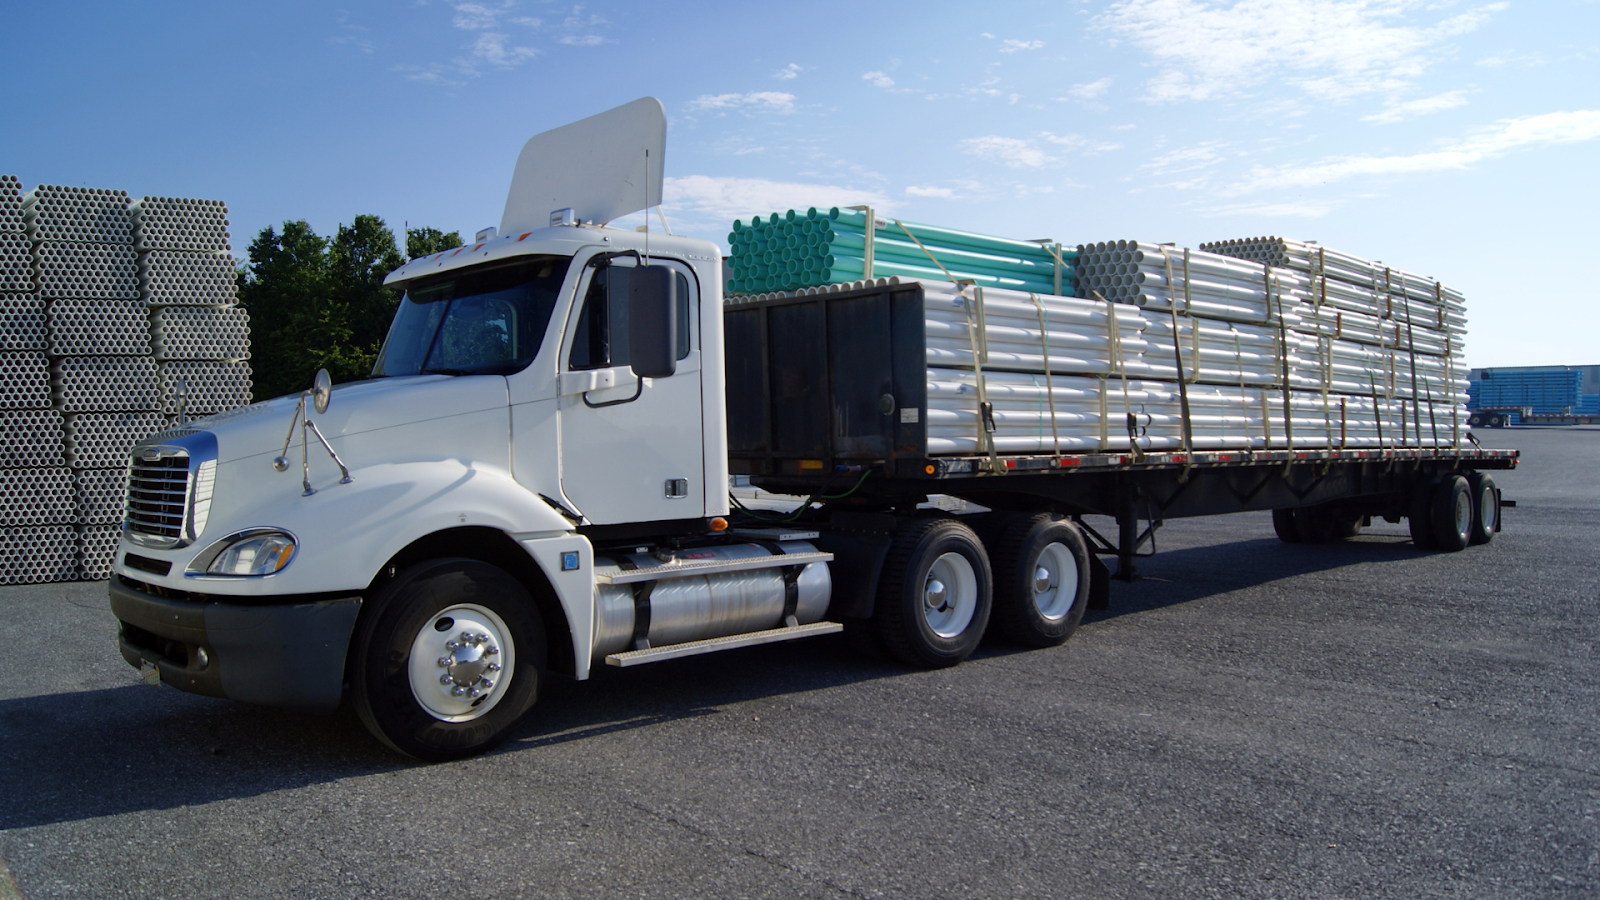 Strategies For Finding Truckloads for Owner Operators